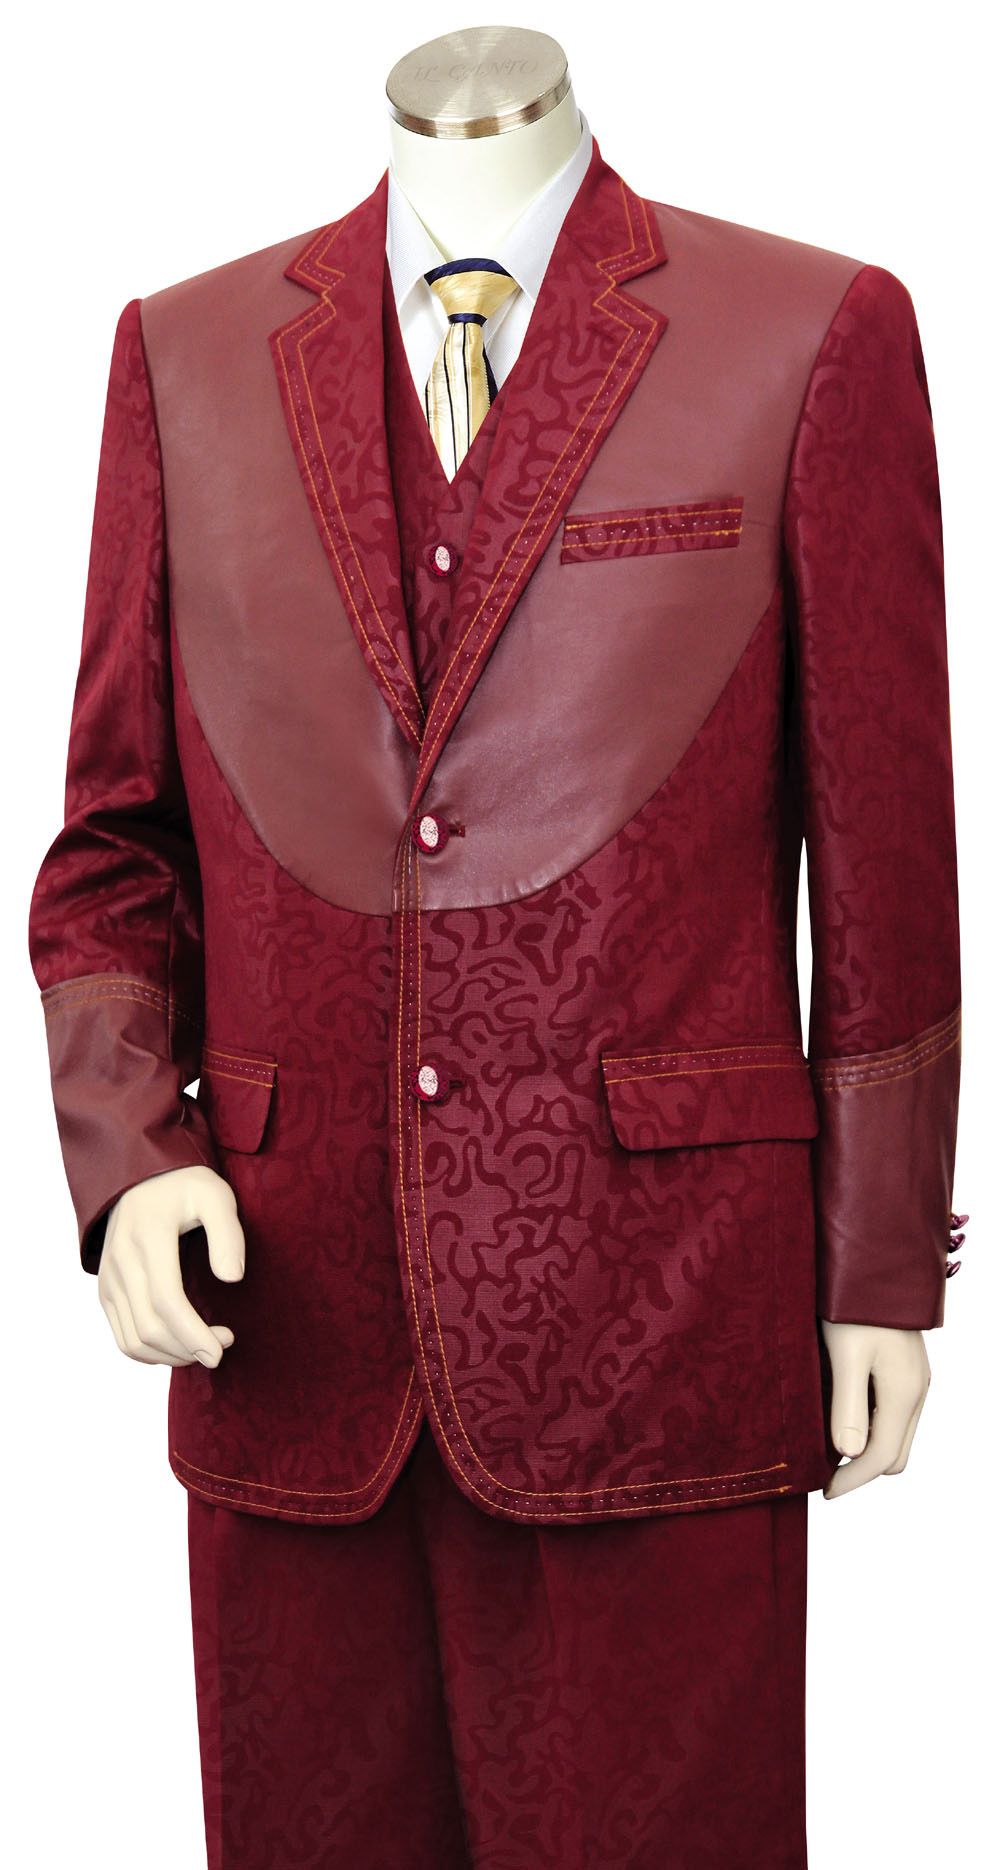 Canto Men's 3-Piece Fashion Suit | Fancy Pattern with Leather Trim | Shopify